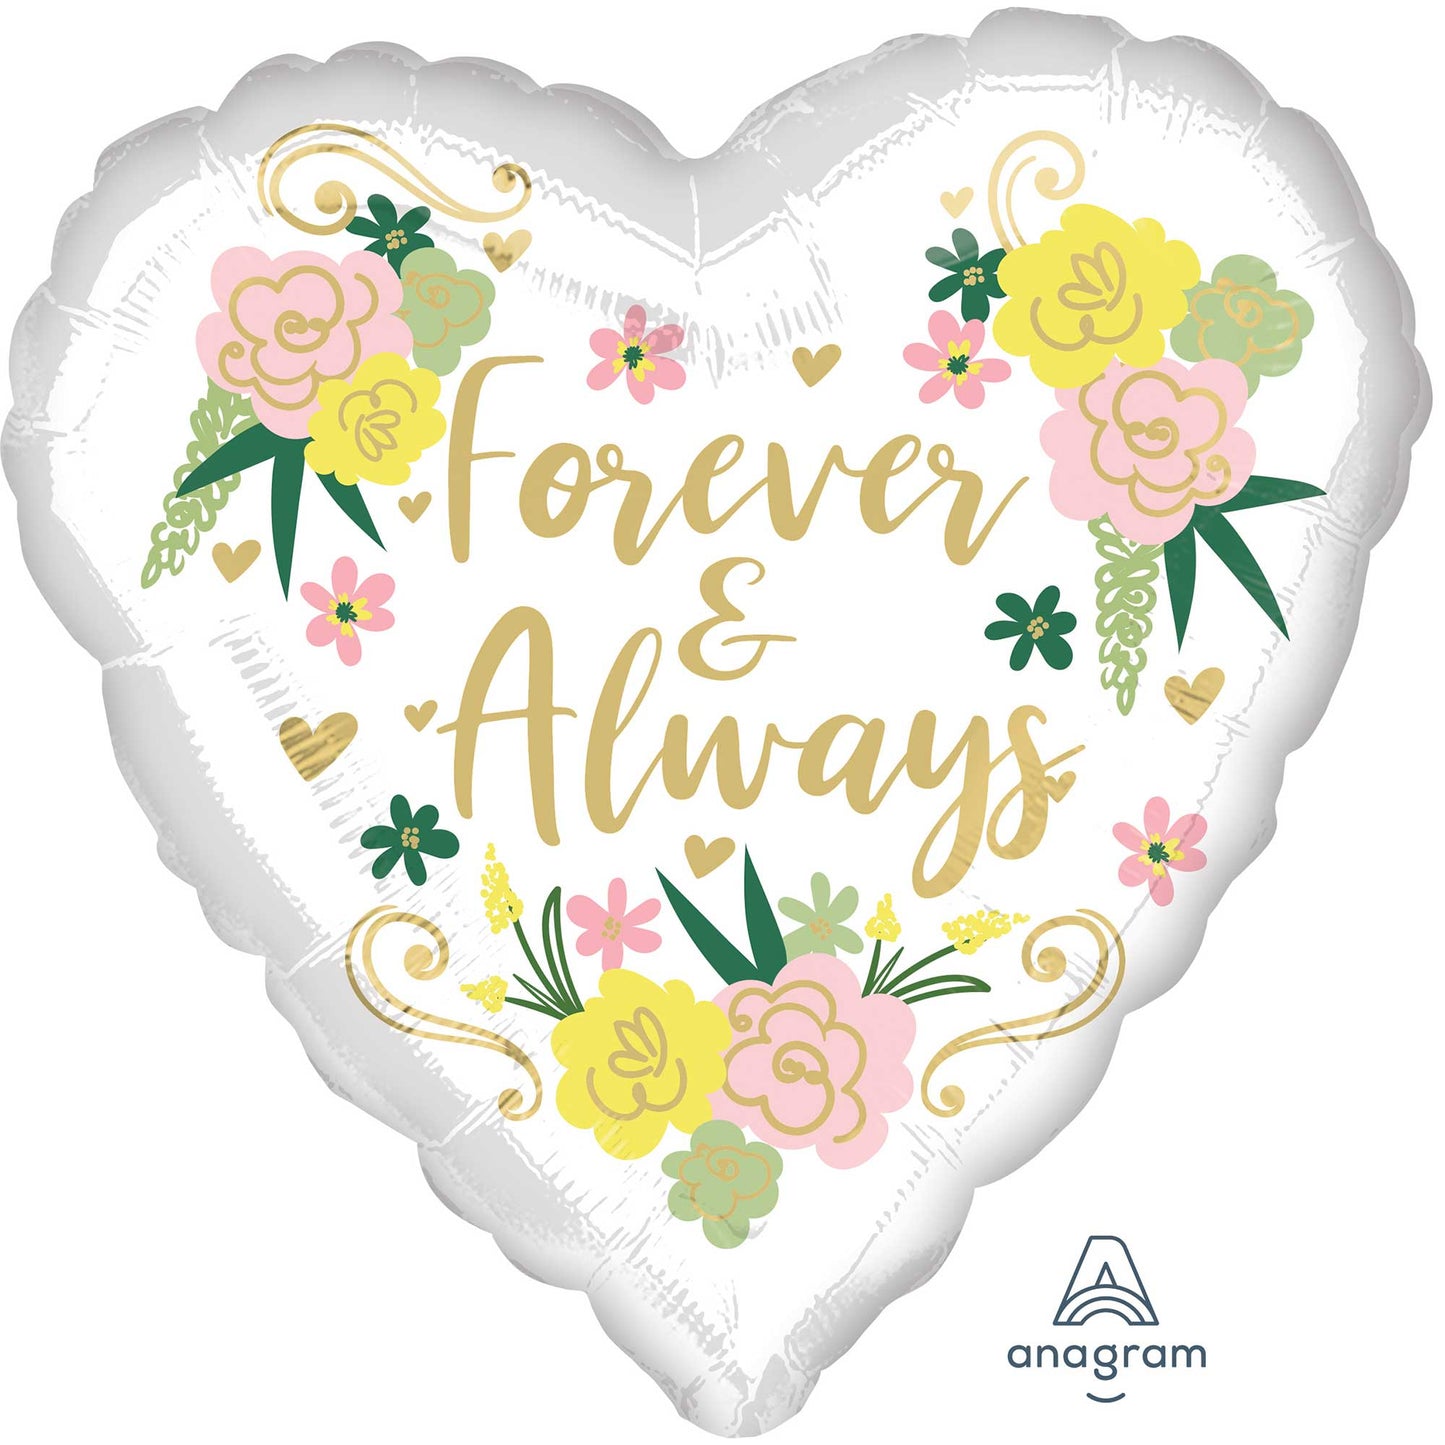 45cm Standard HX Forever & Always Floral Heart S40